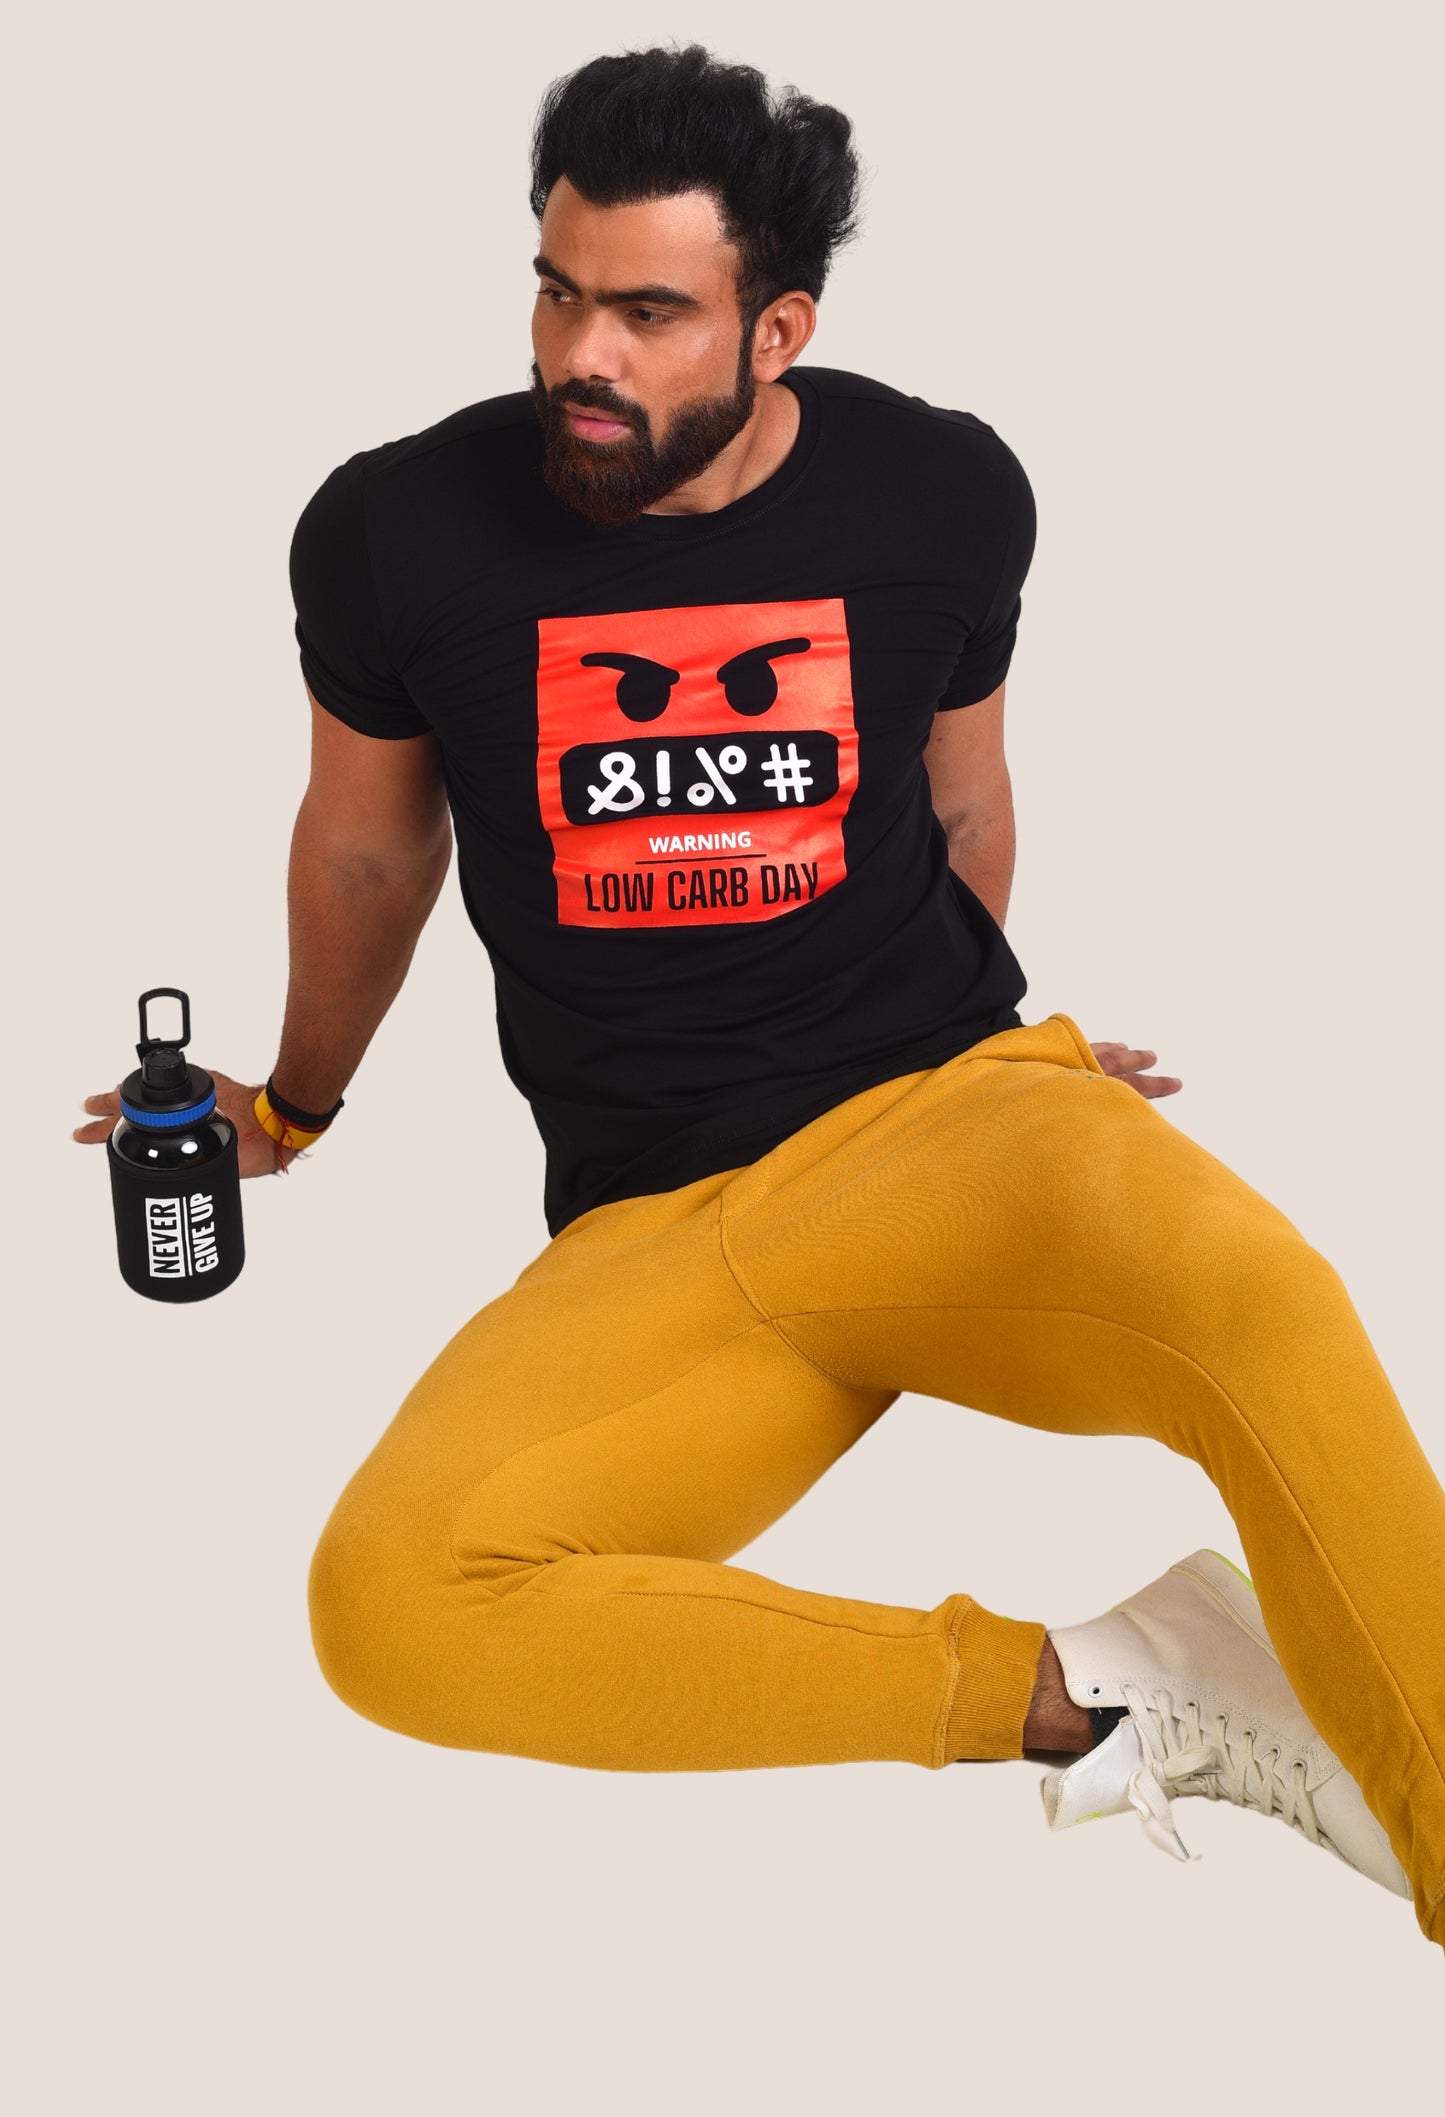 Gym T Shirt - Low Carb Day - Men T-Shirt with premium cotton Lycra. The Sports T Shirt by Strong Soul